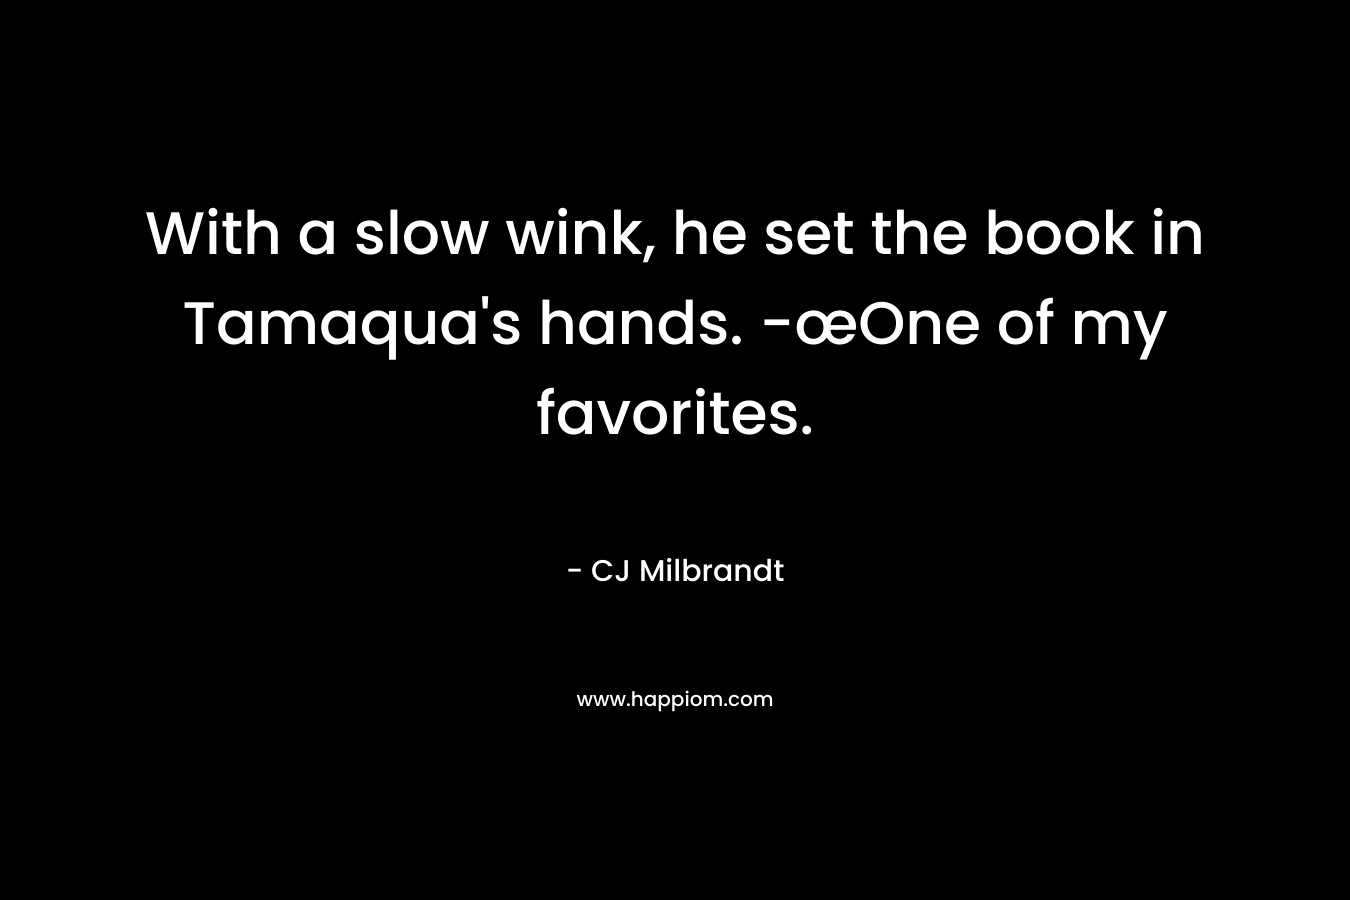 With a slow wink, he set the book in Tamaqua's hands. -œOne of my favorites.